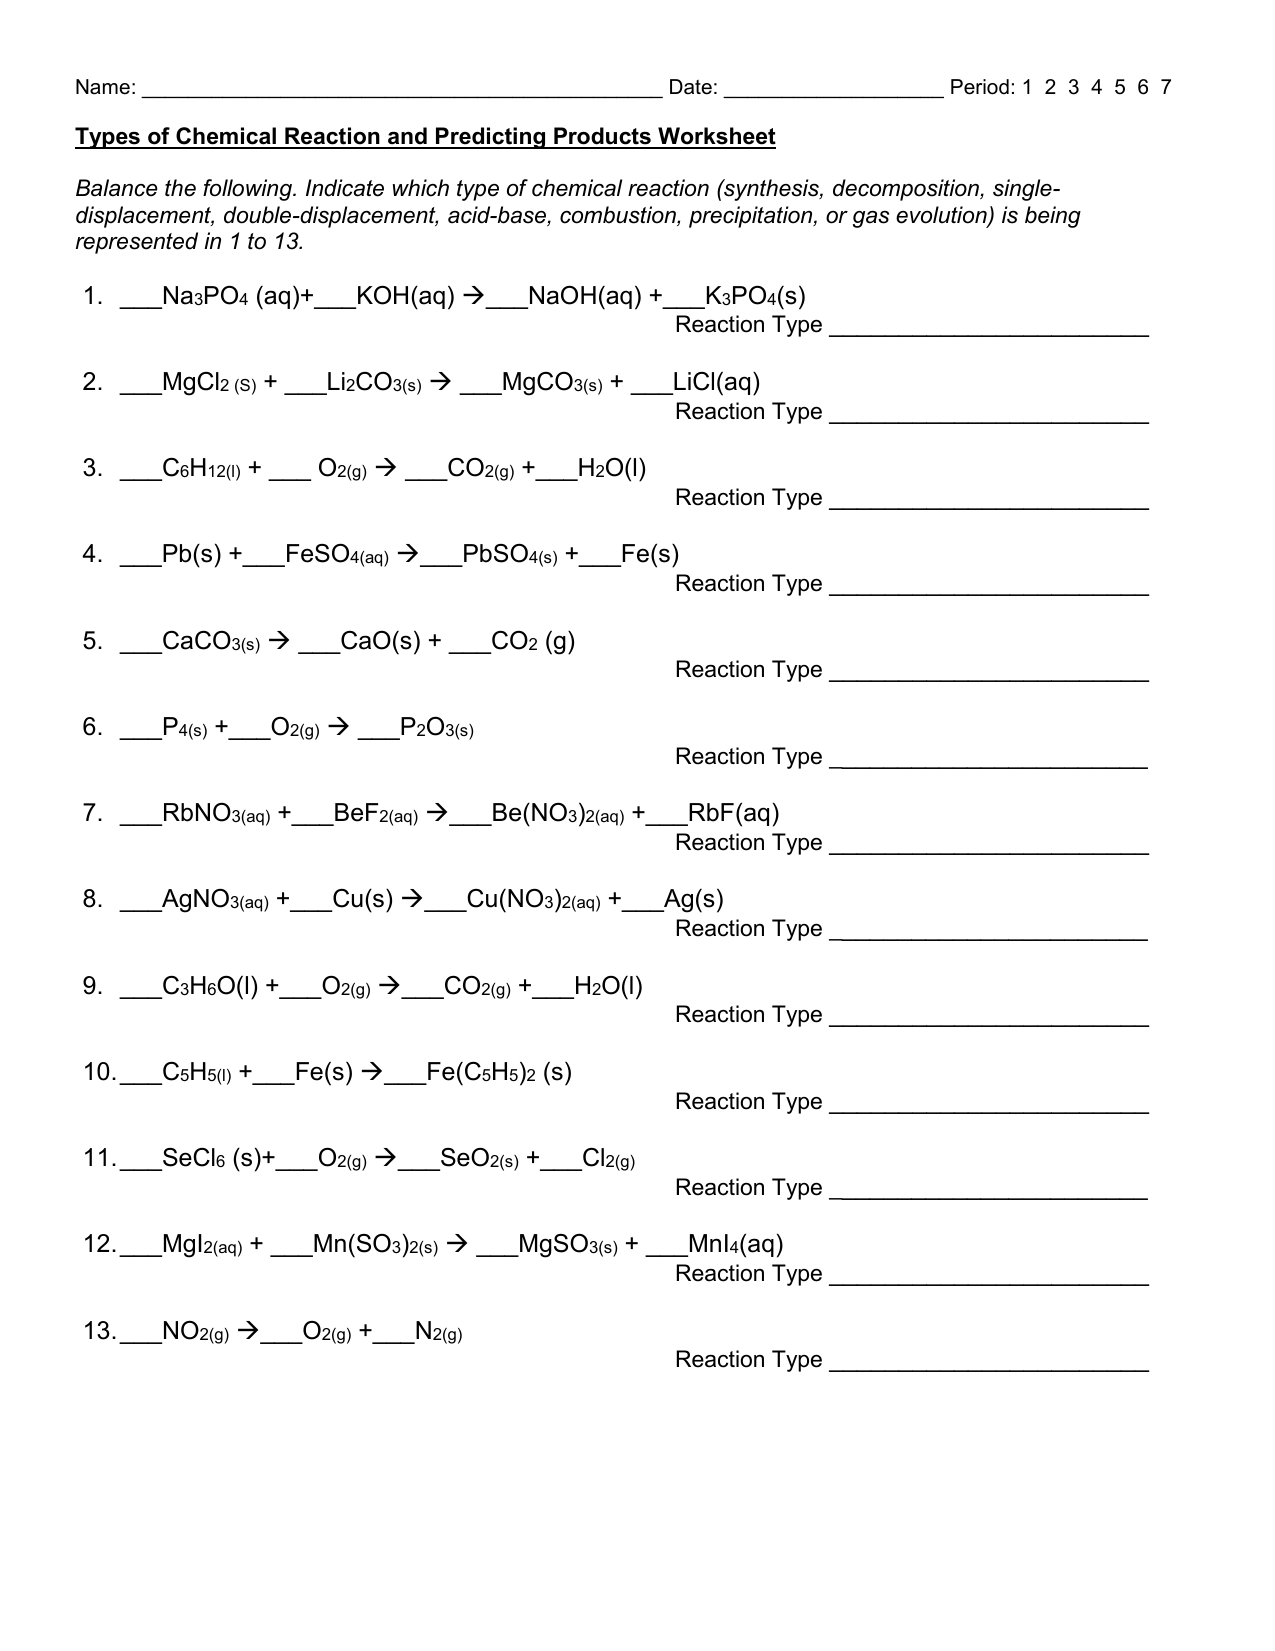 Types of Chemical Reaction and Predicting Products Worksheet Regarding Chemical Reactions Types Worksheet